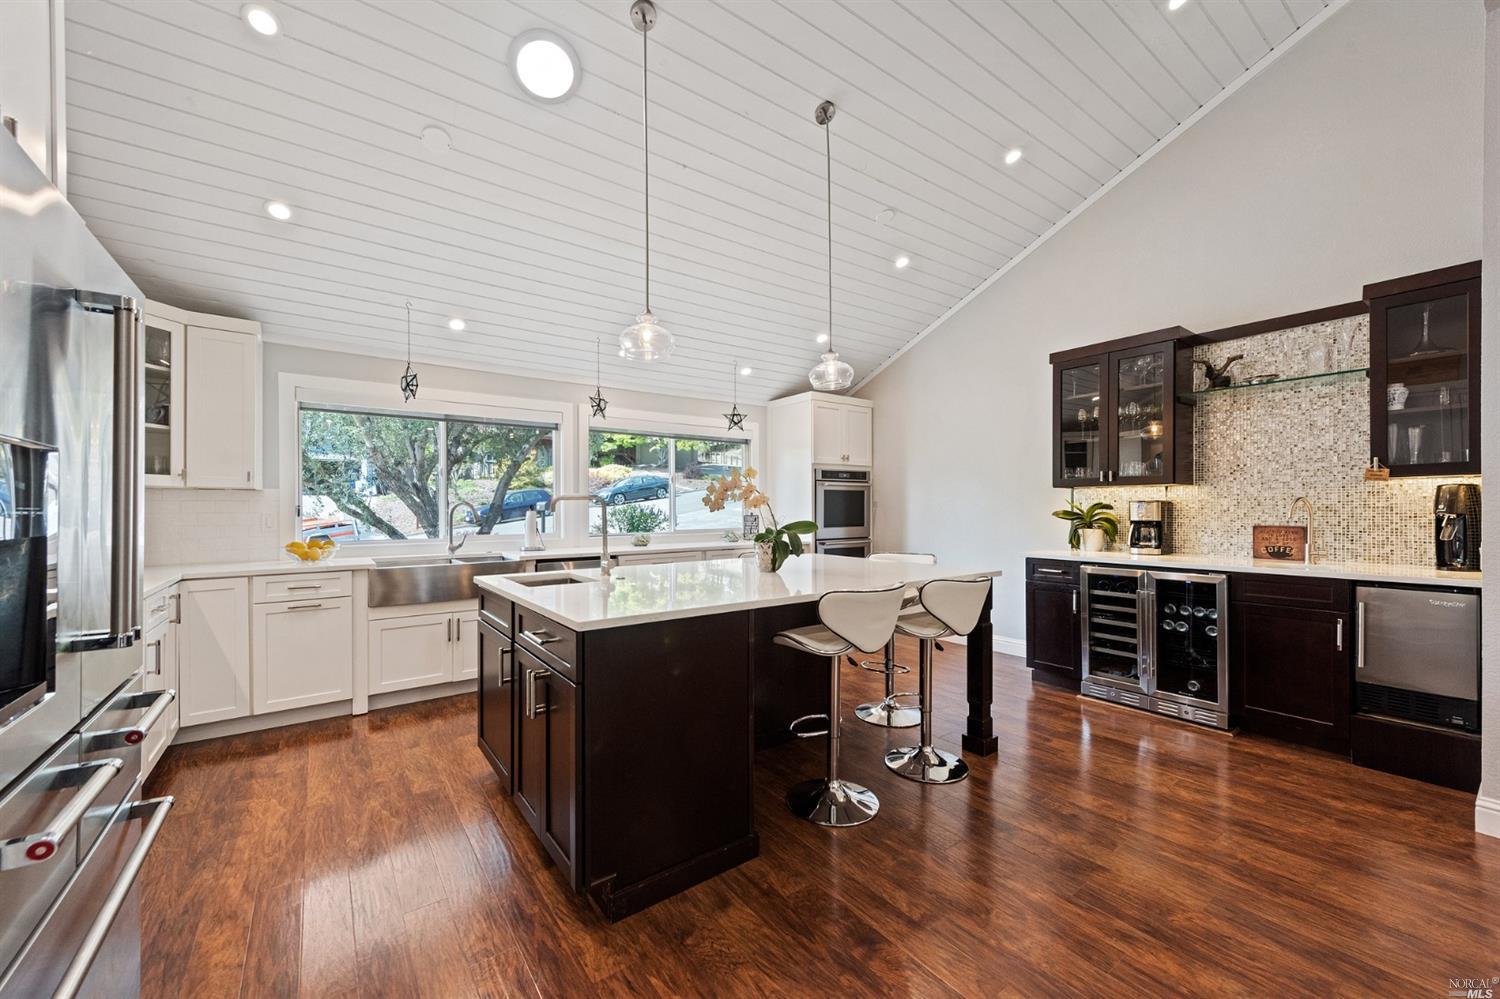 a kitchen with stainless steel appliances granite countertop wooden cabinets and wooden floors